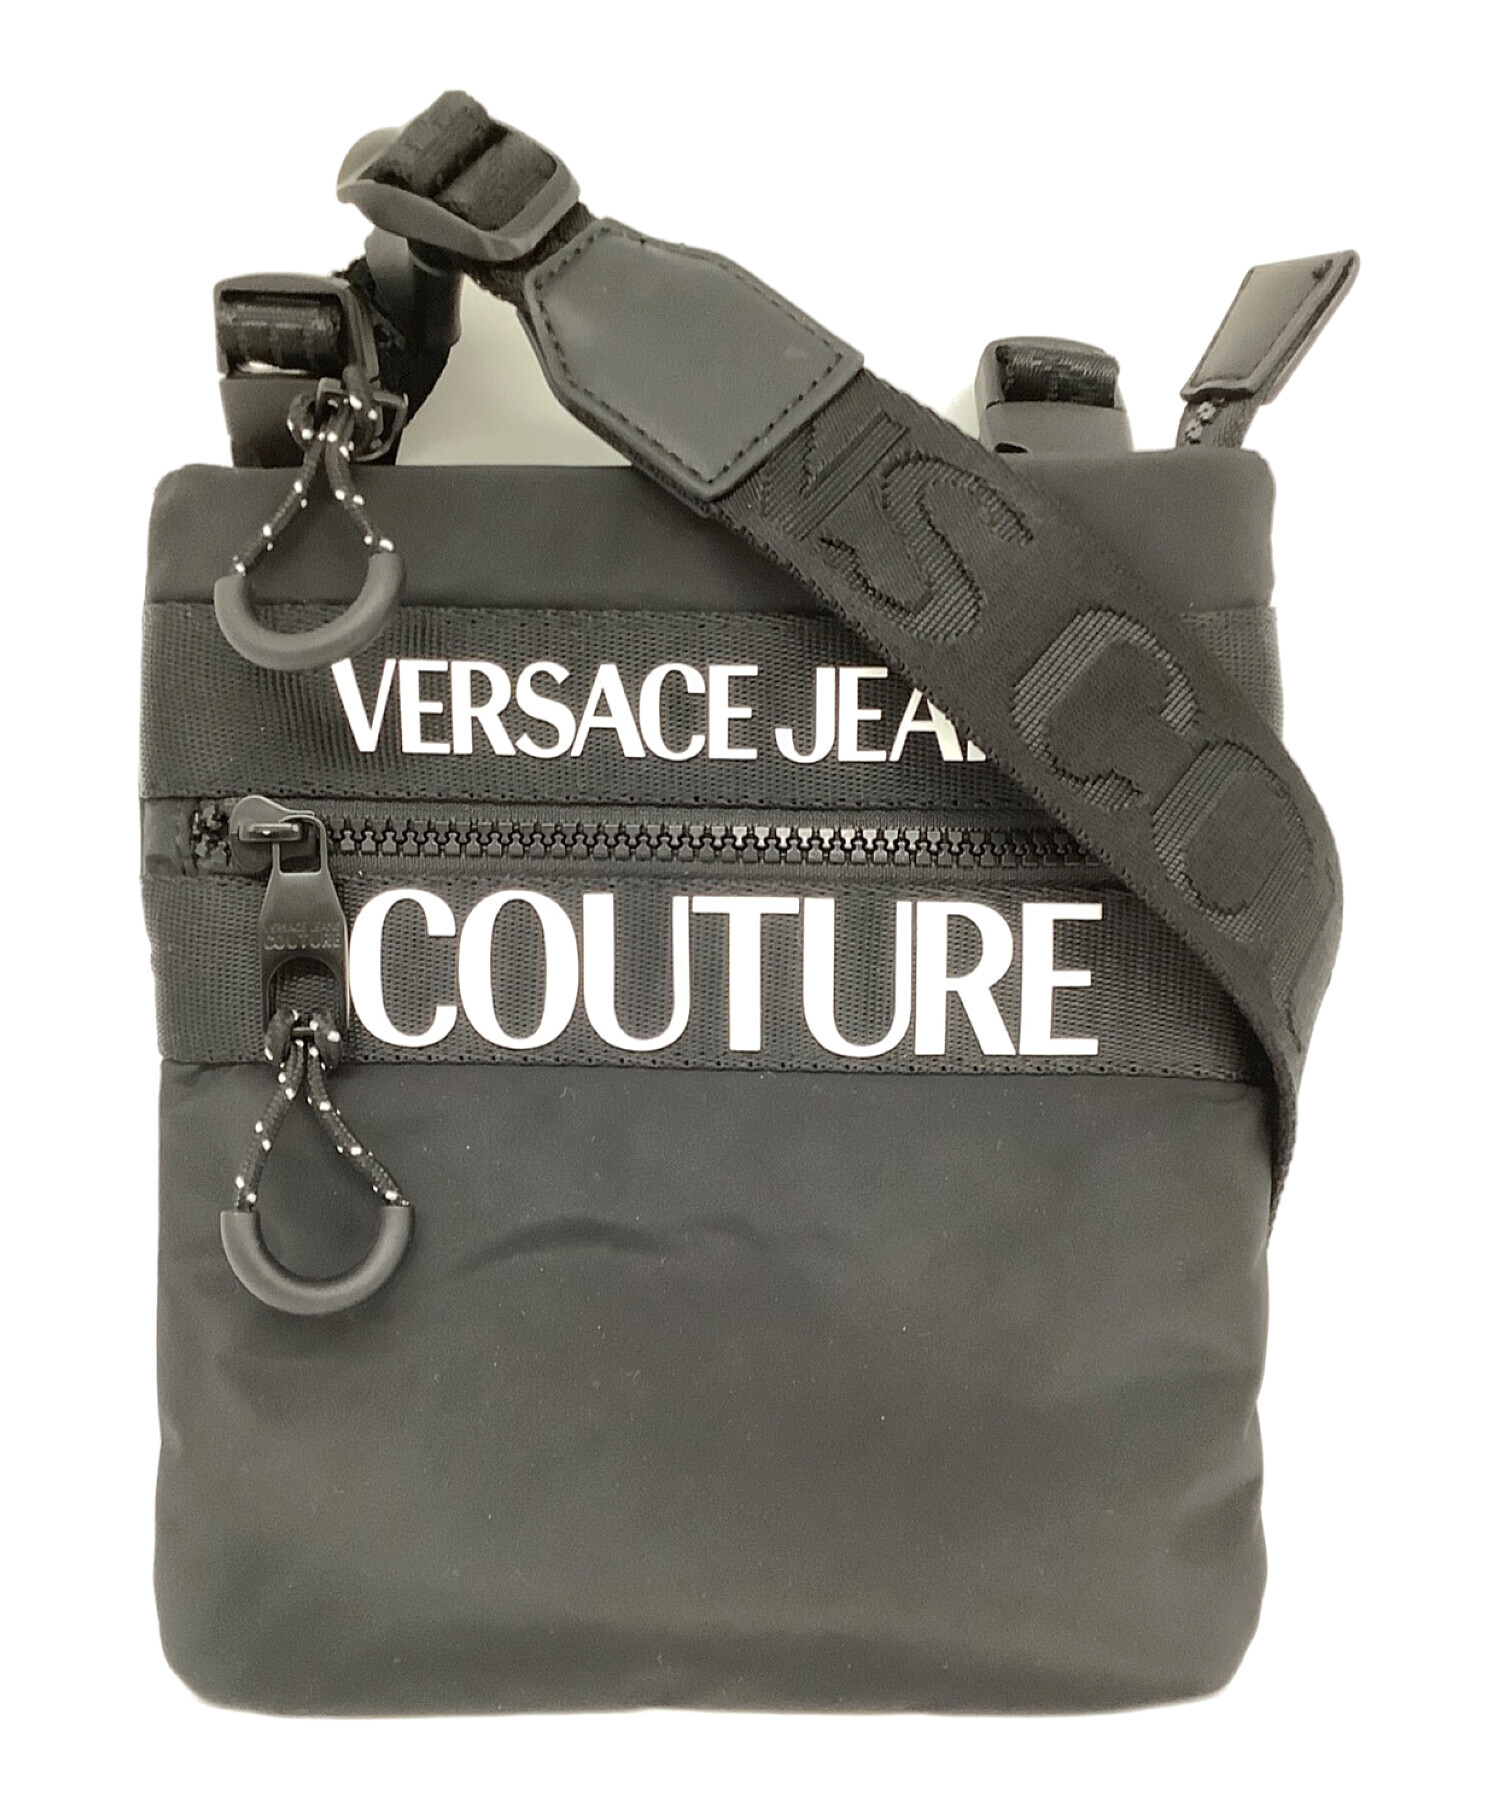 VERSACE JEANS COUTURE ショルダーバッグ グレー ブラック